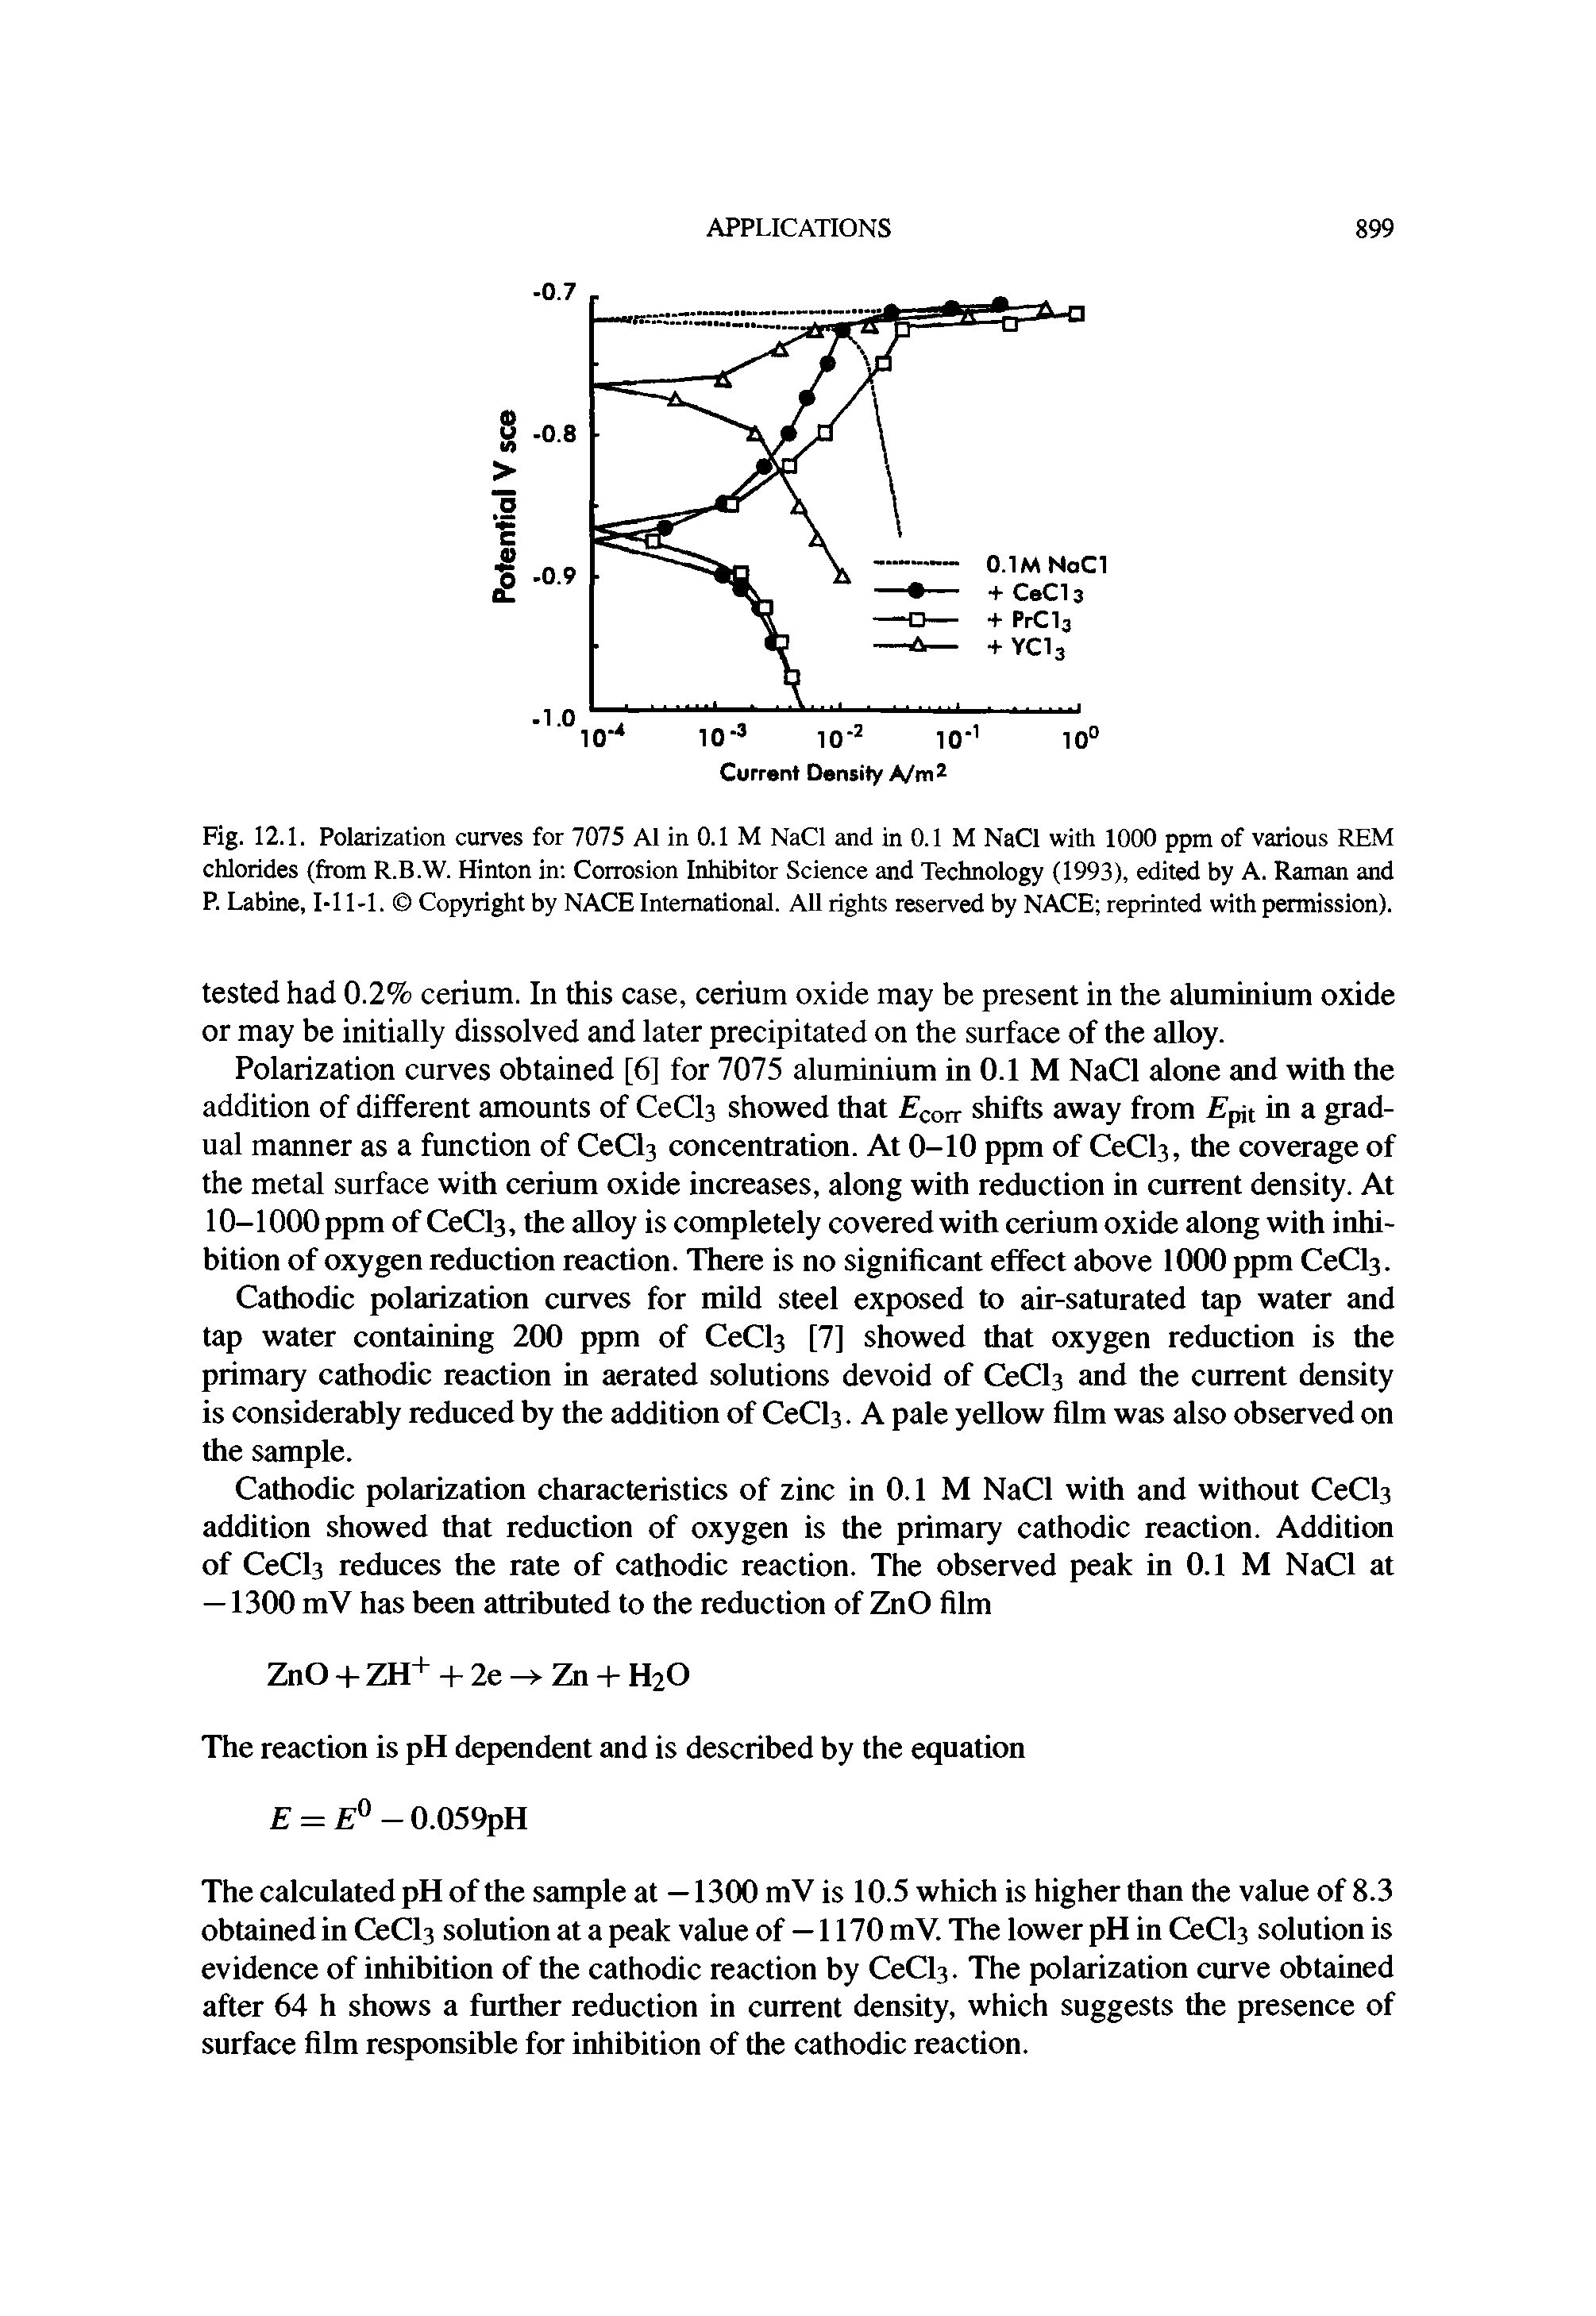 Fig. 12.1. Polarization curves for 7075 A1 in 0.1 M NaCl and in 0.1 M NaCl with 1000 ppm of various REM chlorides (from R.B.W. Hinton in Corrosion Inhibitor Science and Technology (1993), edited by A. Raman and P. Labine, 1-11-1. Copyright by NACE International. All rights reserved by NACE reprinted with permission).